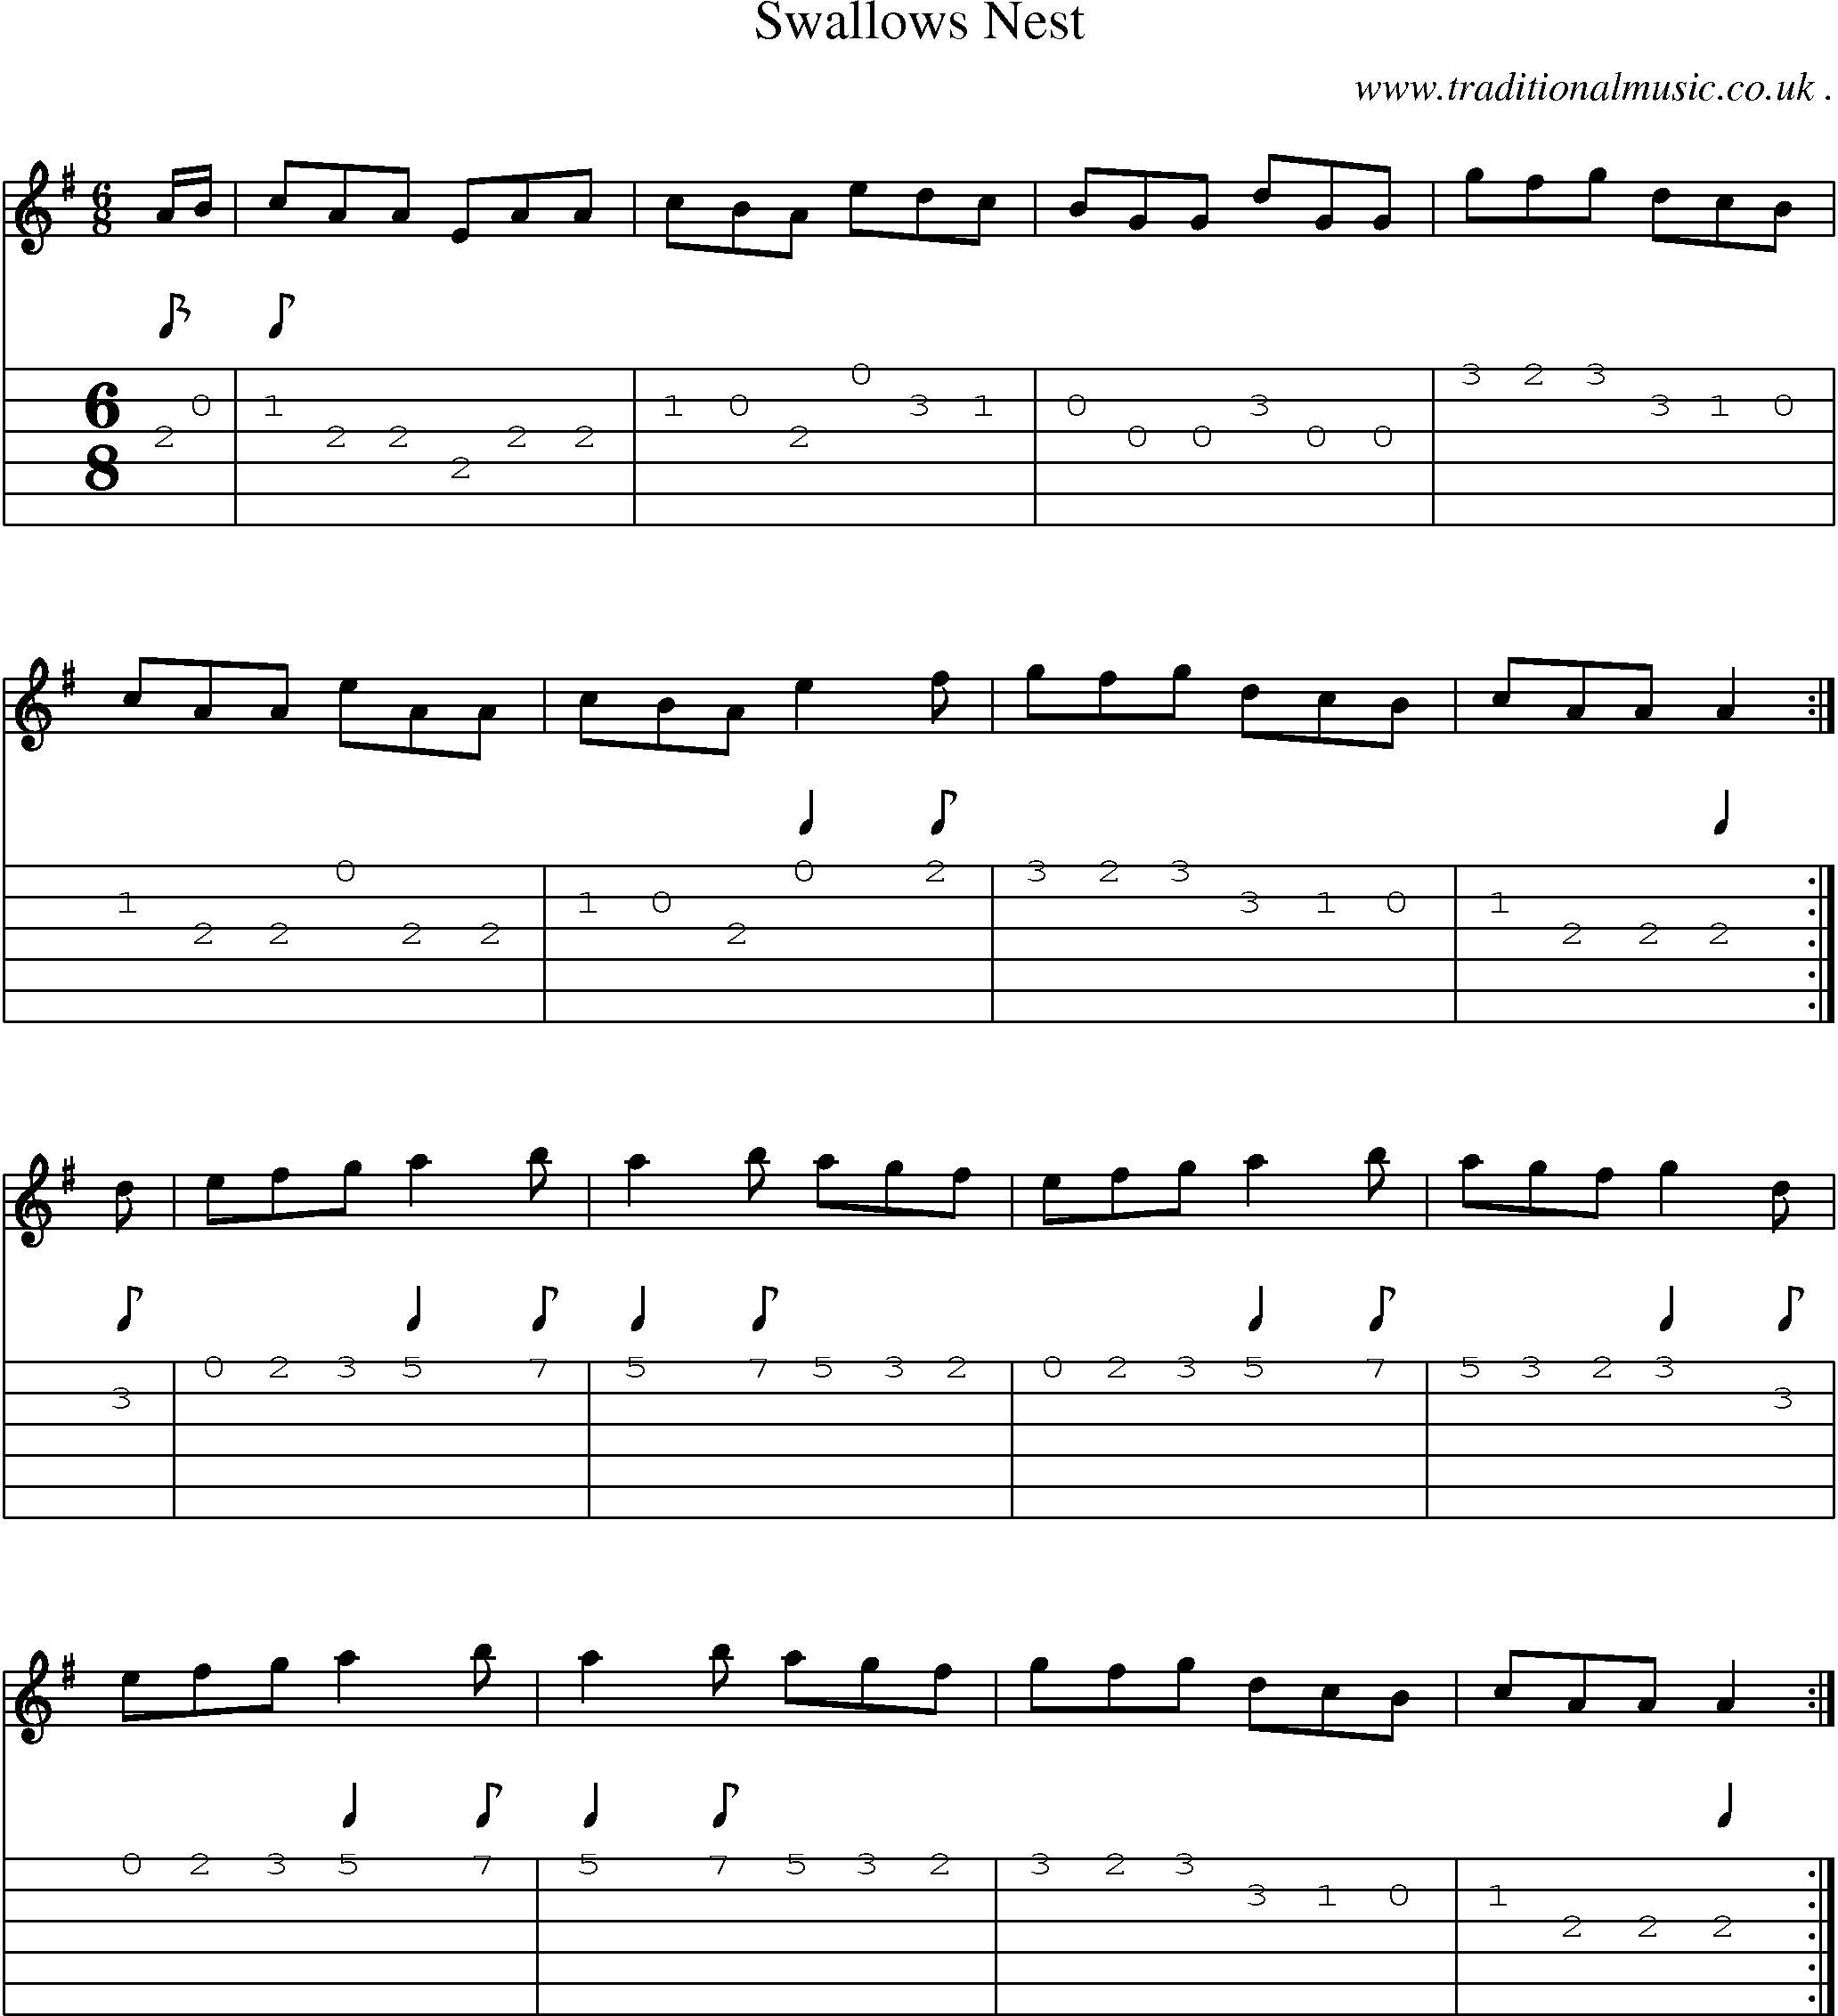 Sheet-Music and Guitar Tabs for Swallows Nest